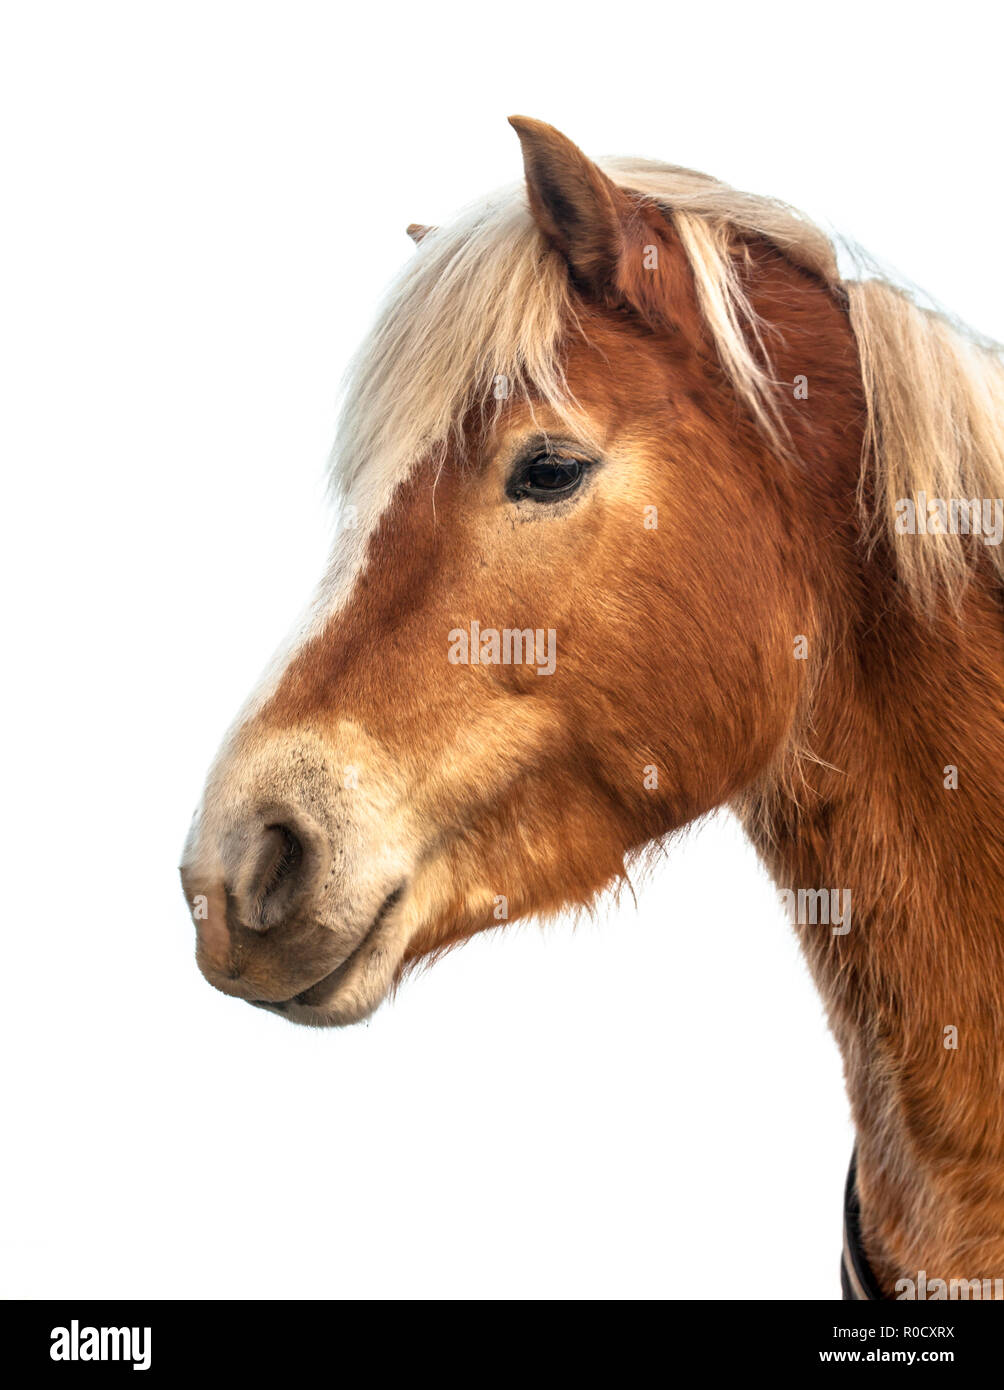 Head of a cute horse on white background. Horses and humans interact in a wide variety of sport competitions and non-competitive recreational pursuits Stock Photo